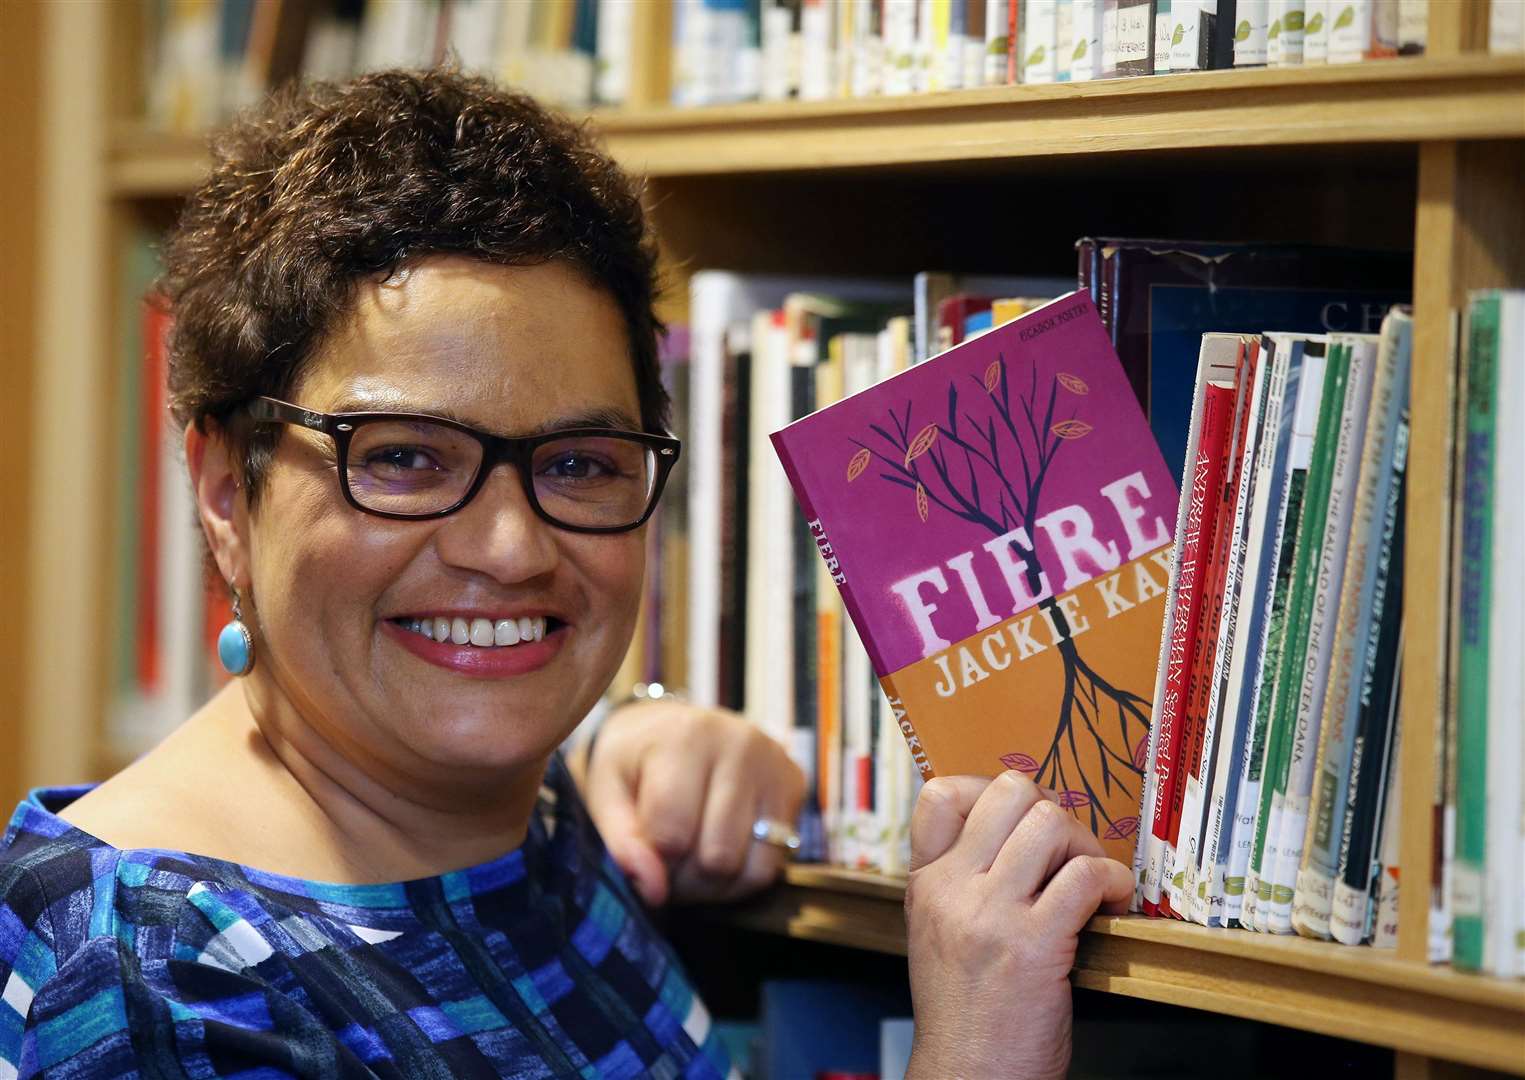 New Makar Jackie Kay will be an interviewer at the book festival (Andrew Milligan/PA Wire)